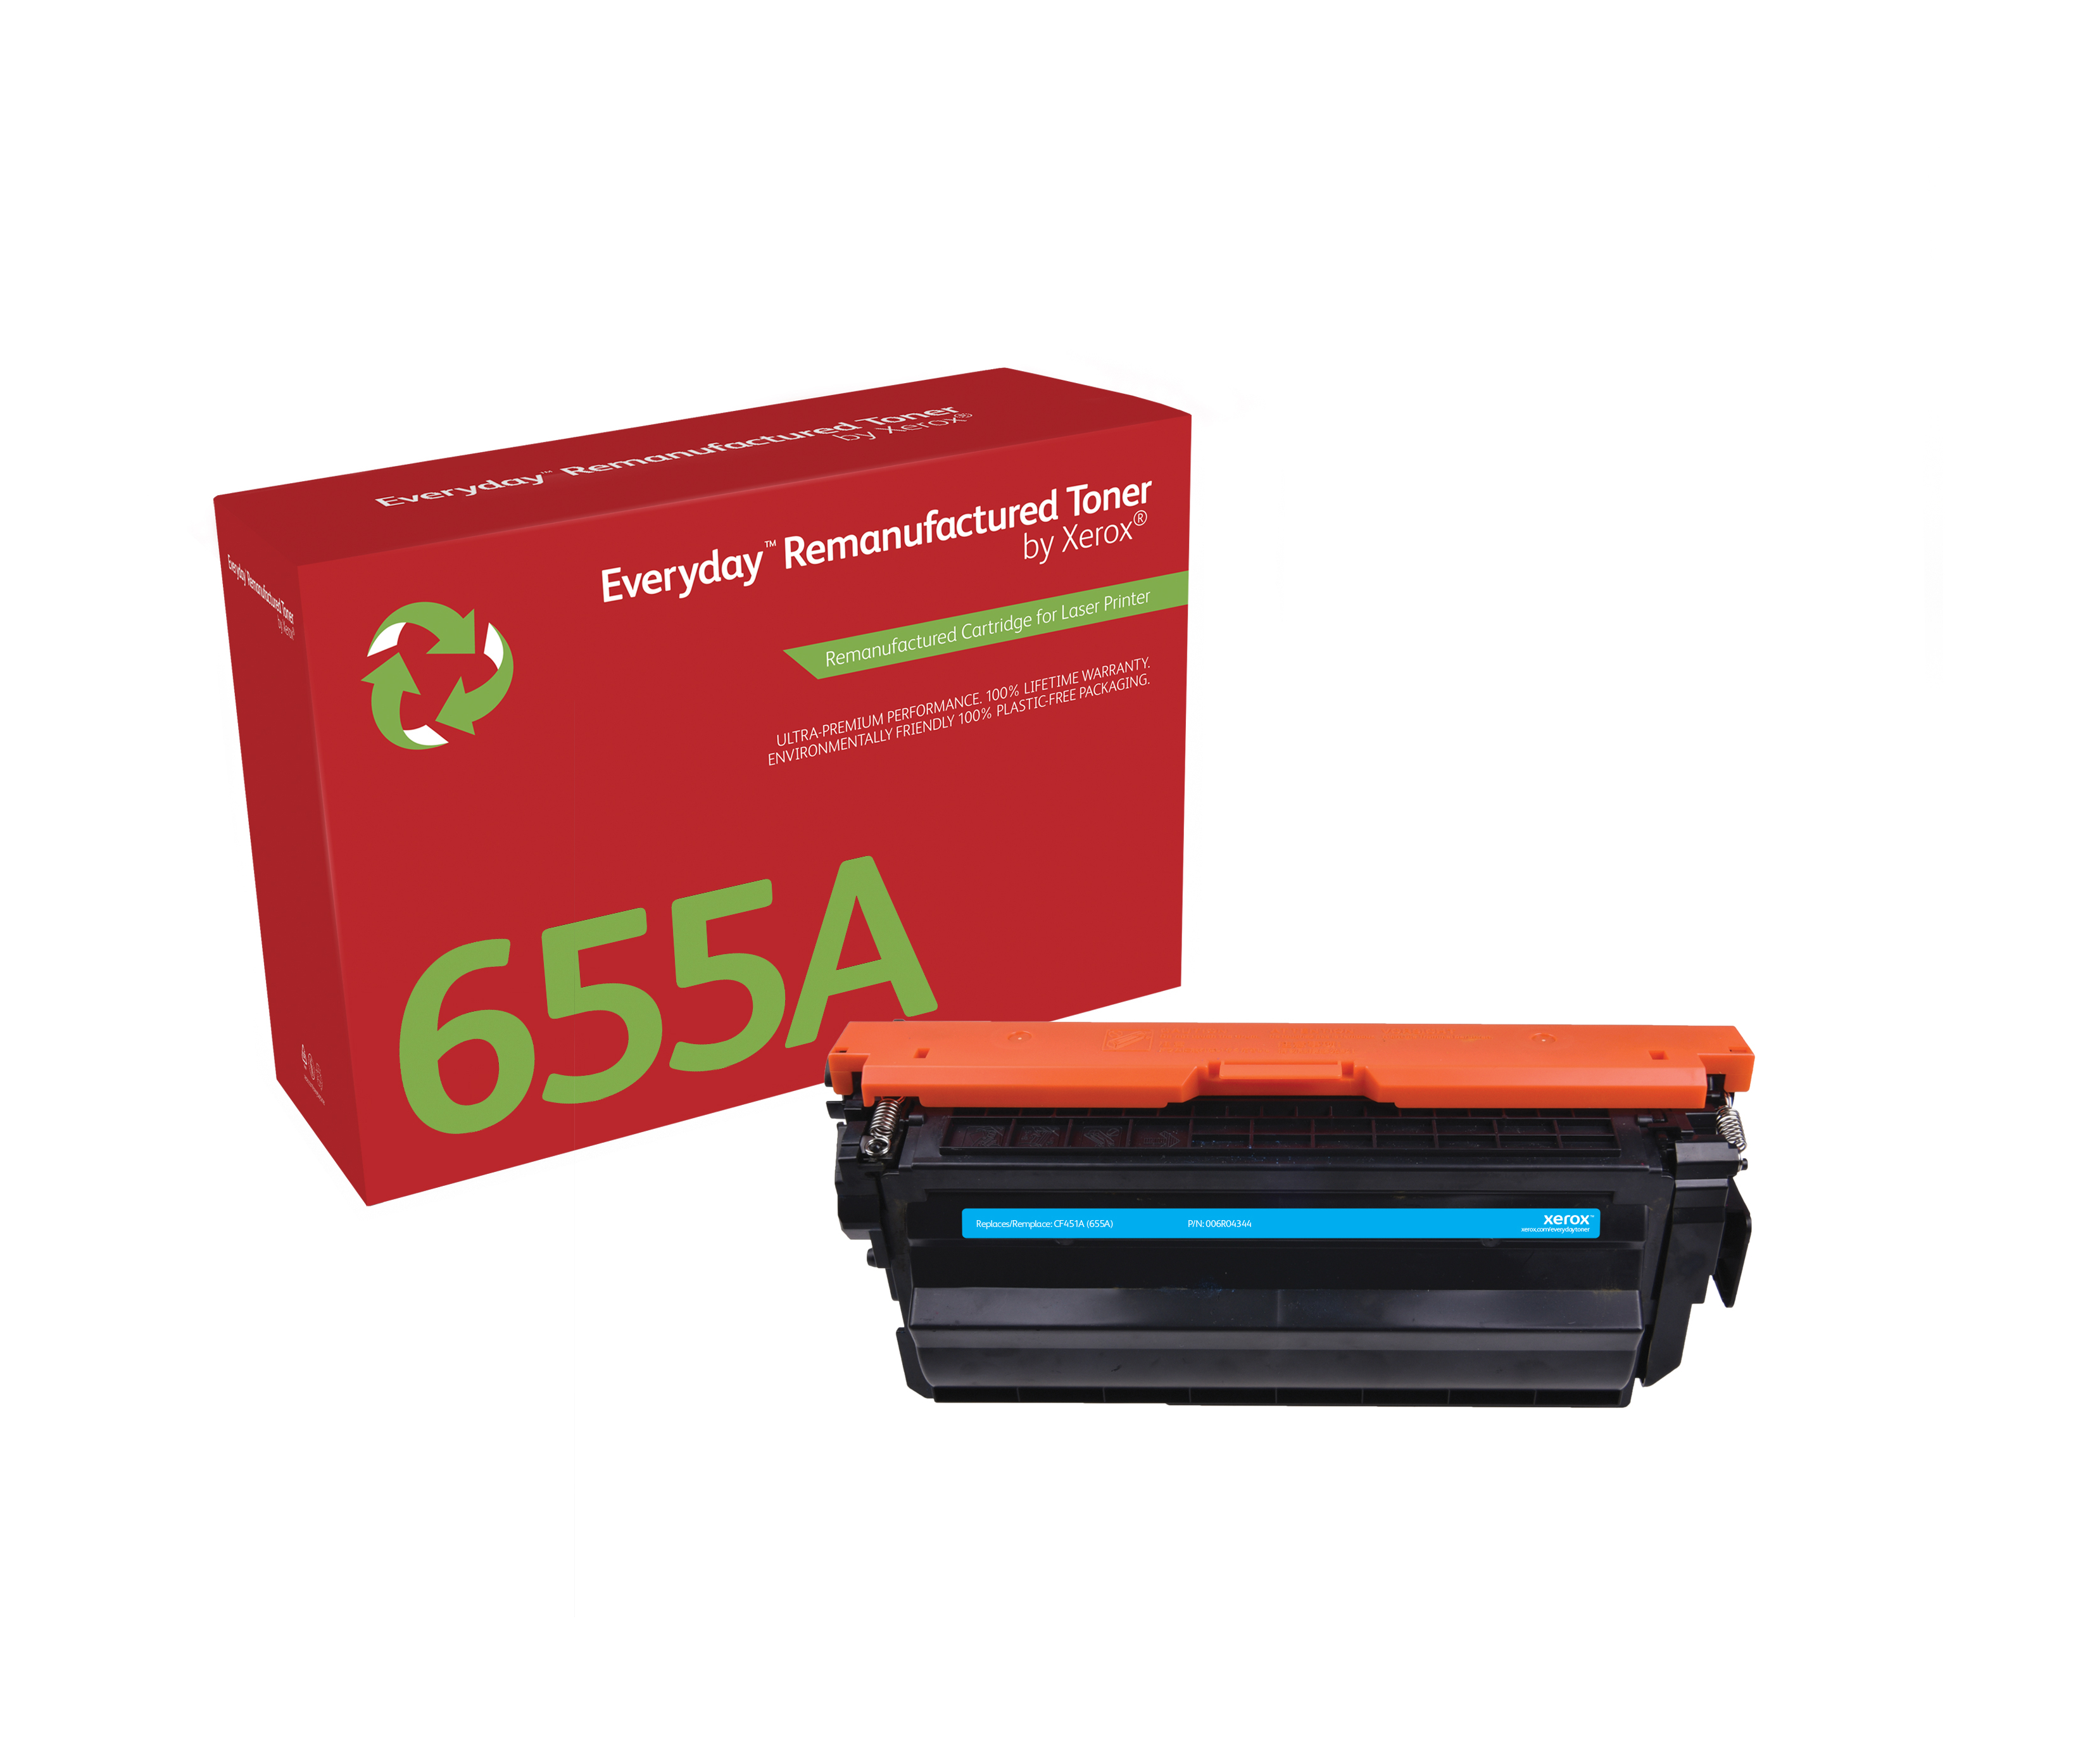 Everyday Cyan Toner compatible with HP 655A (CF451A), Standard Yield  006R04344 by Xerox